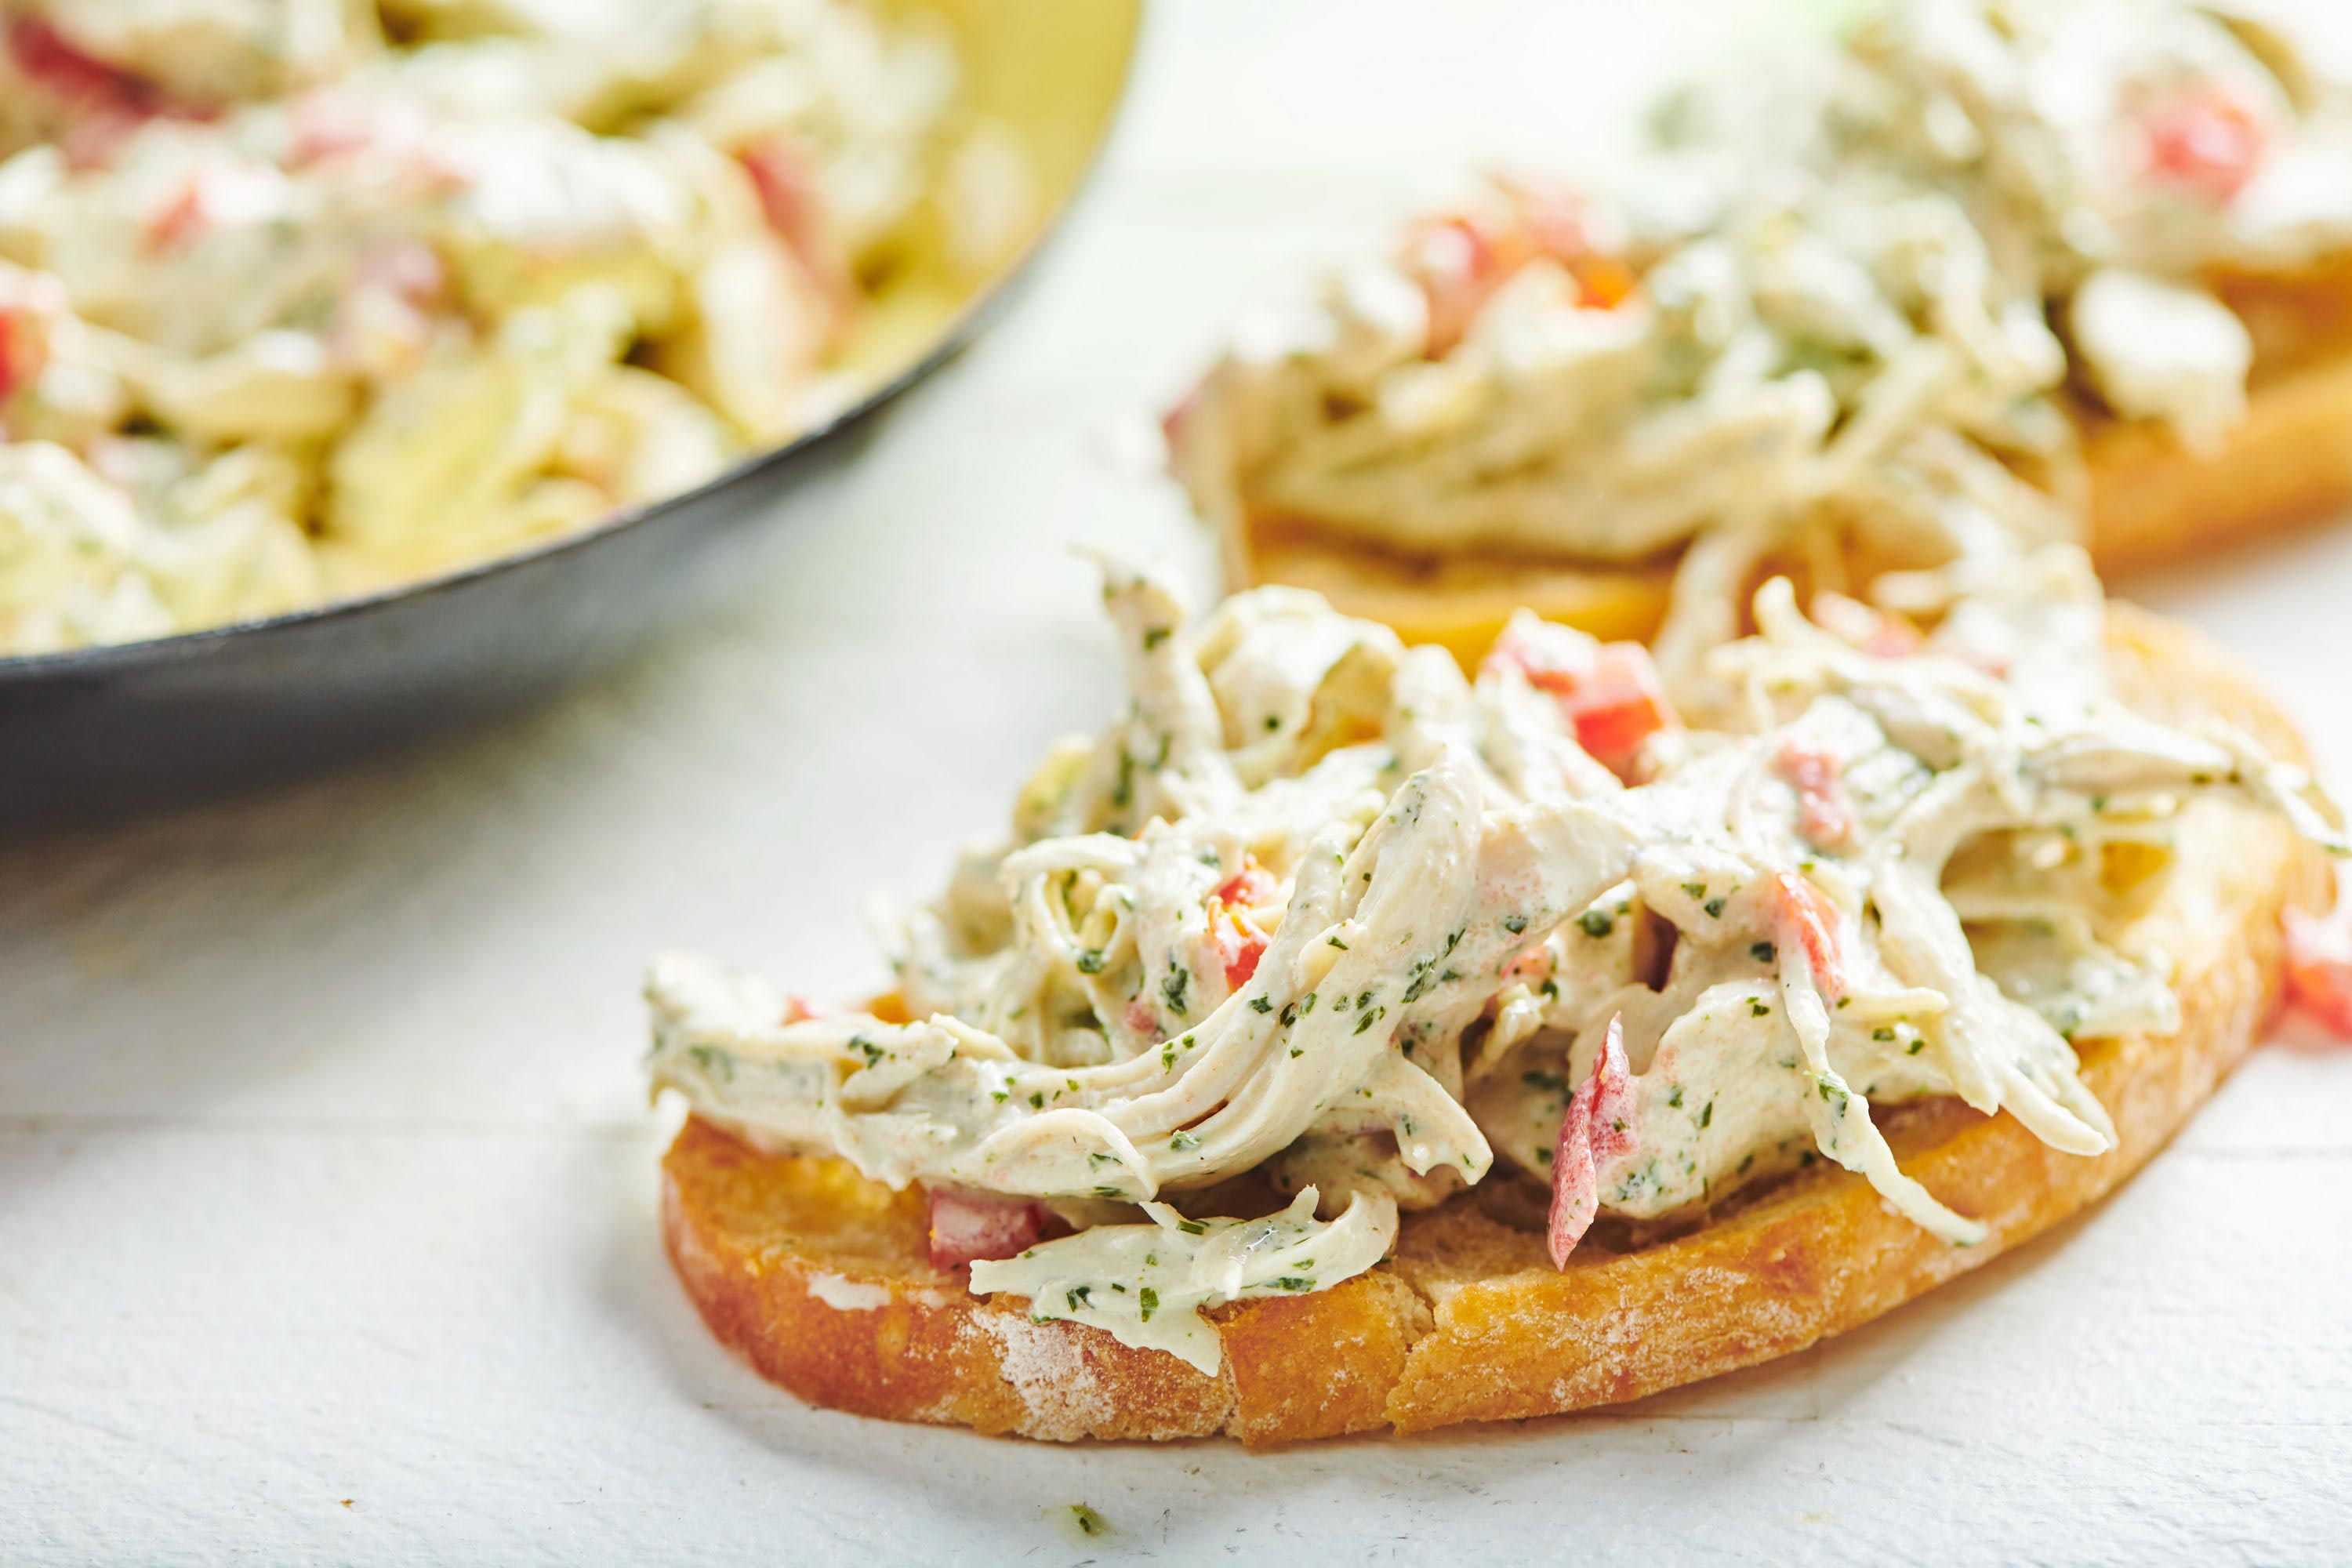 Toasted baguette bread topped with shredded chicken salad.